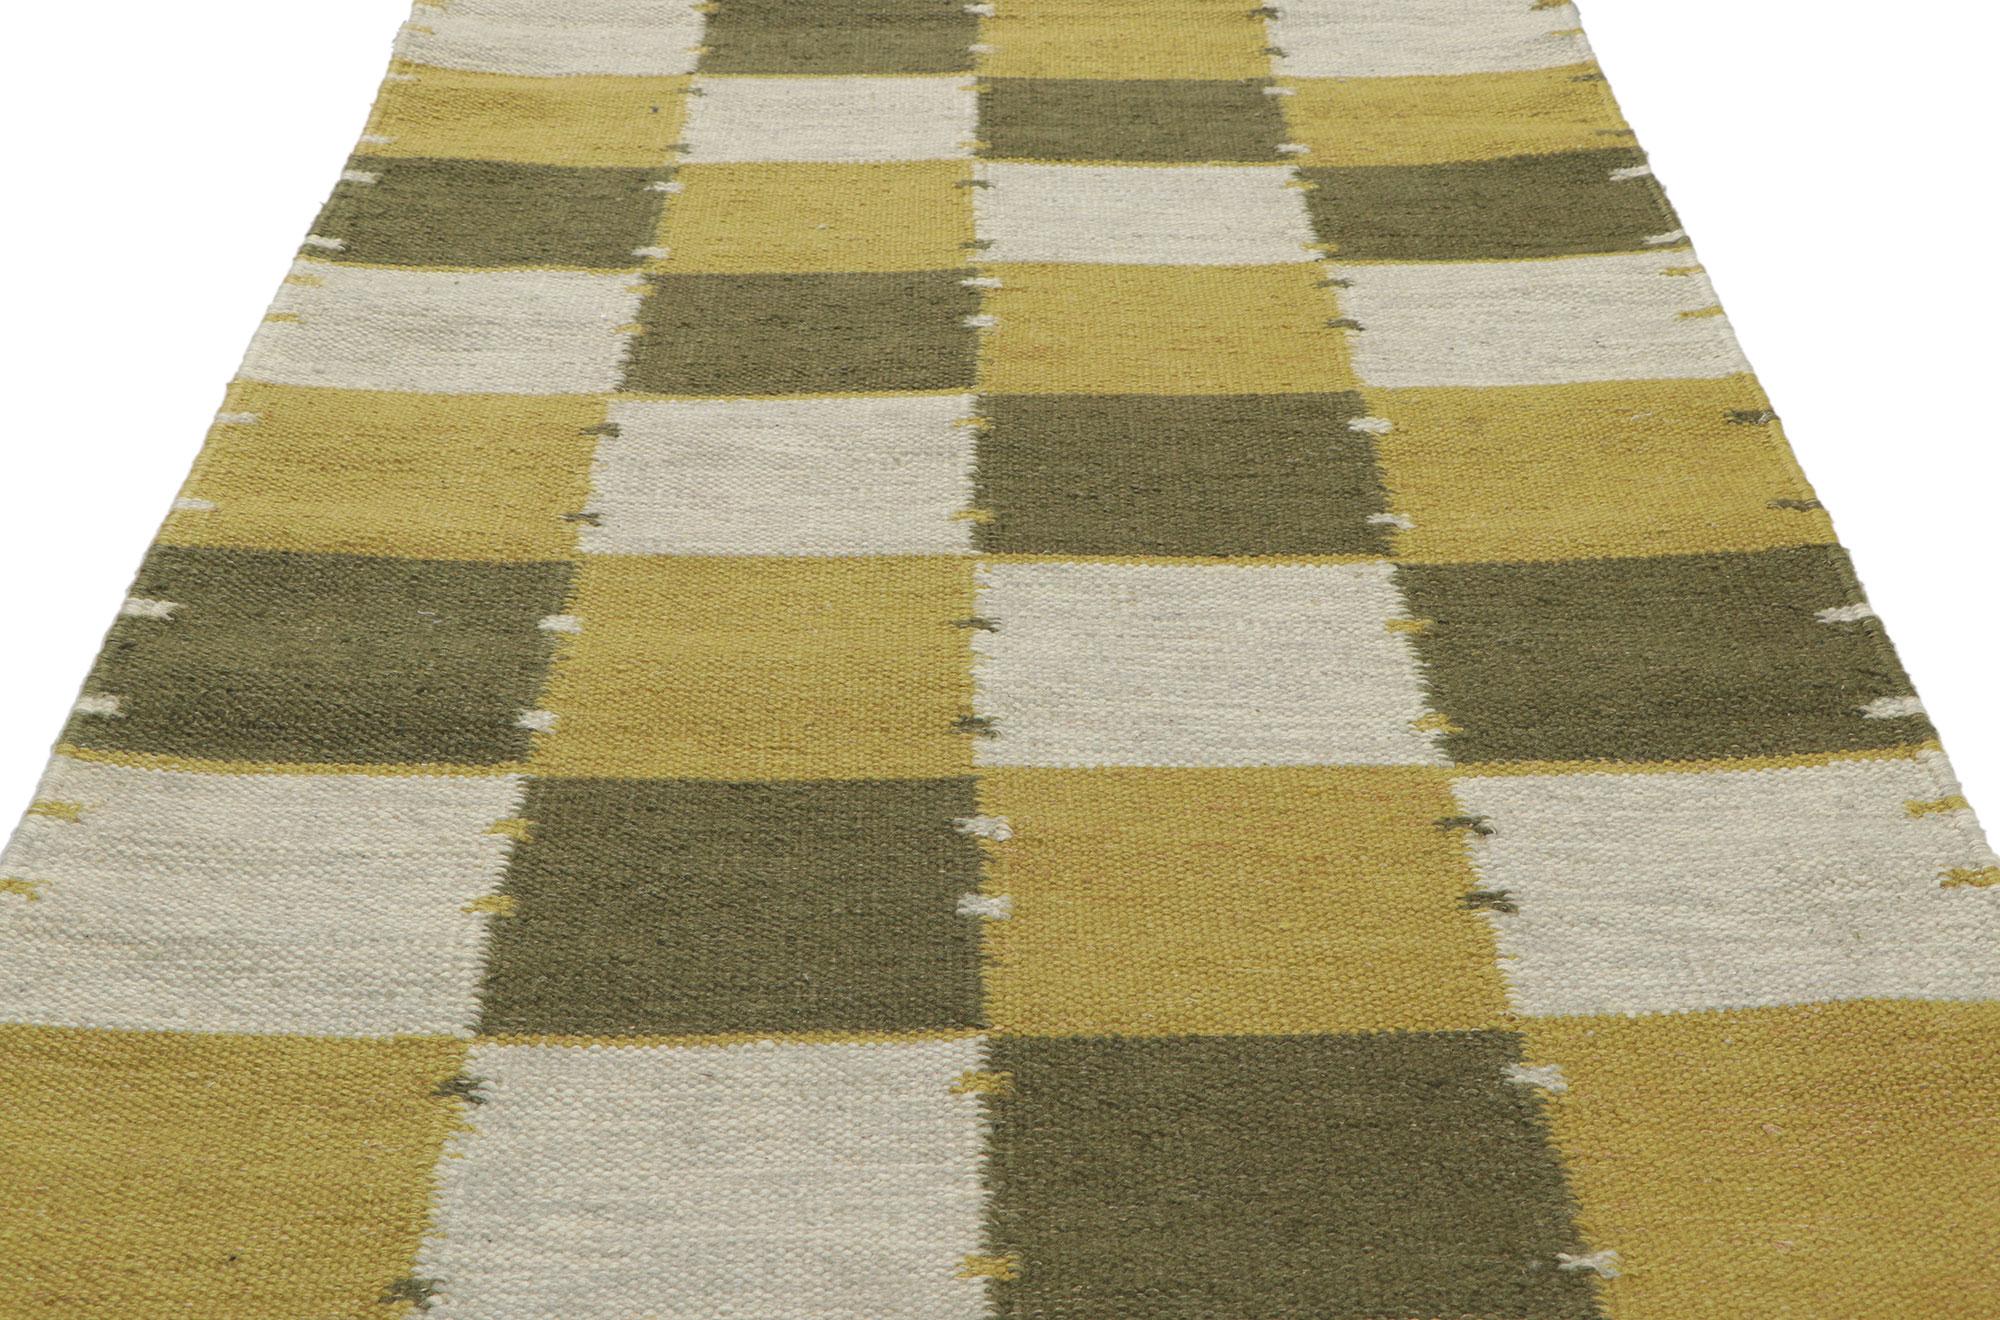 Indian New Pair of Matching Swedish Inspired Kilim Rugs For Sale